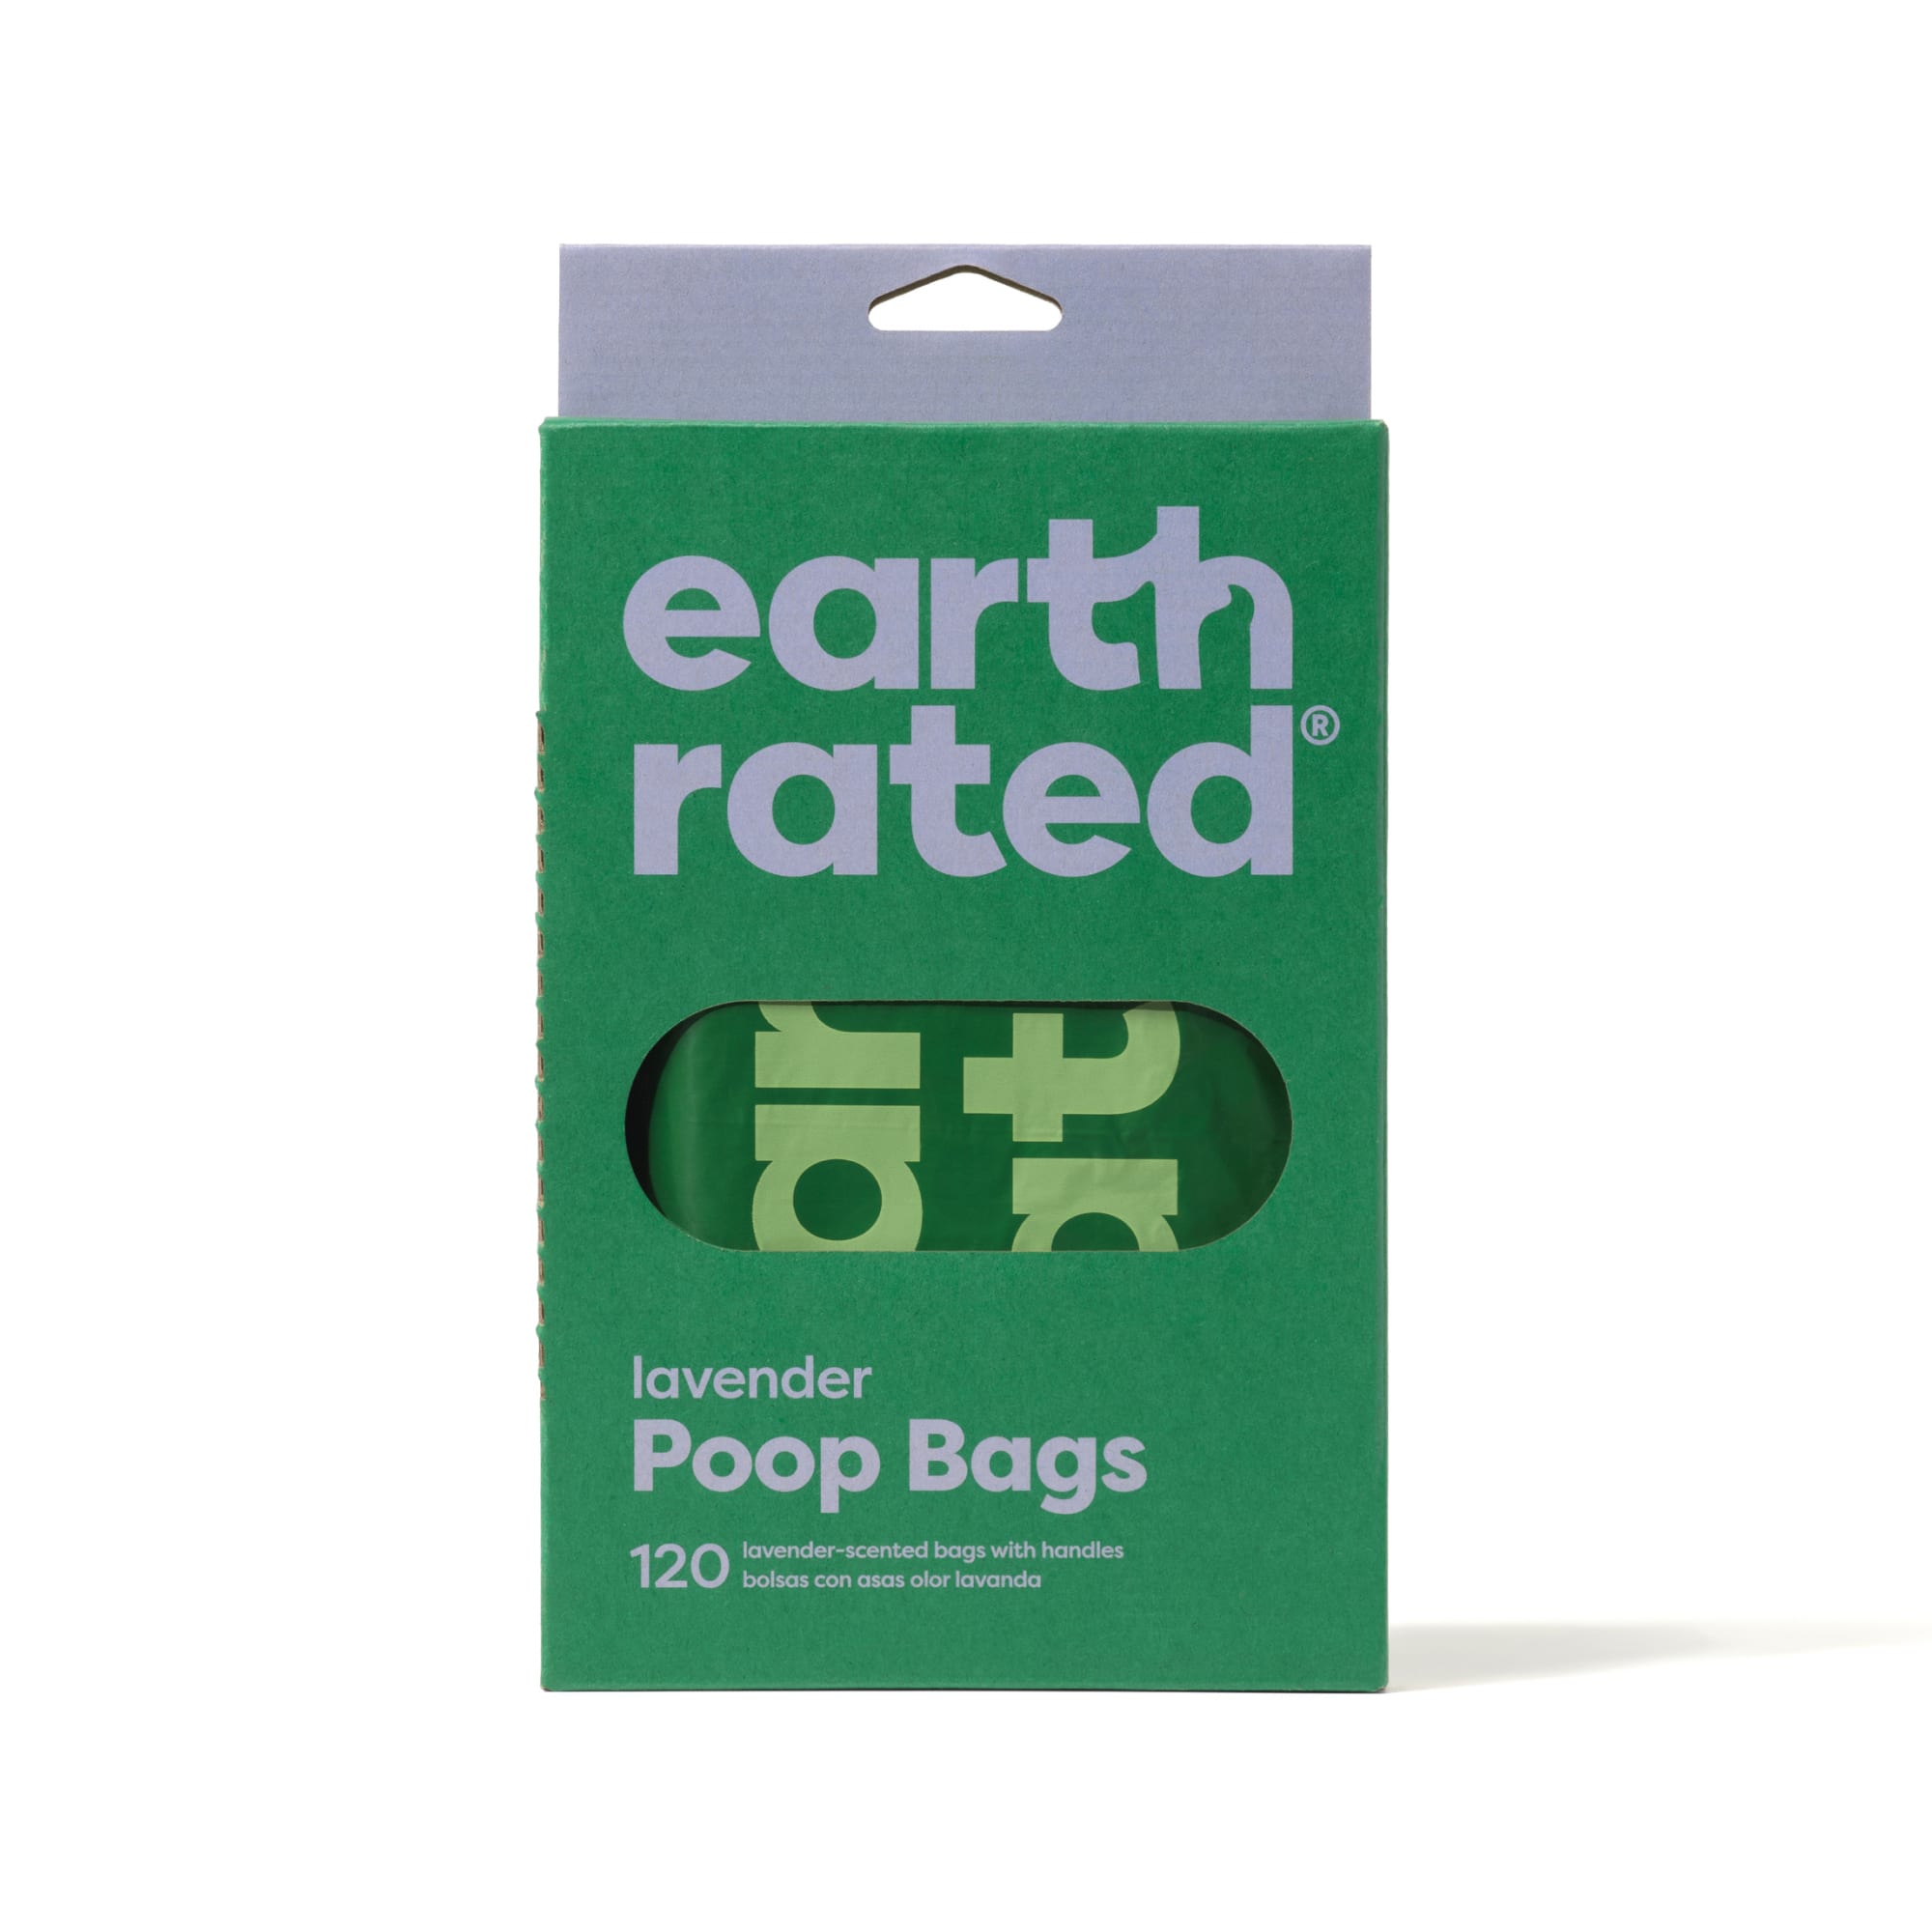 EARTH RATED Dog Puppy Thick Poo Poop Bag Waste Bags Roll Refill Rolls Dispenser 